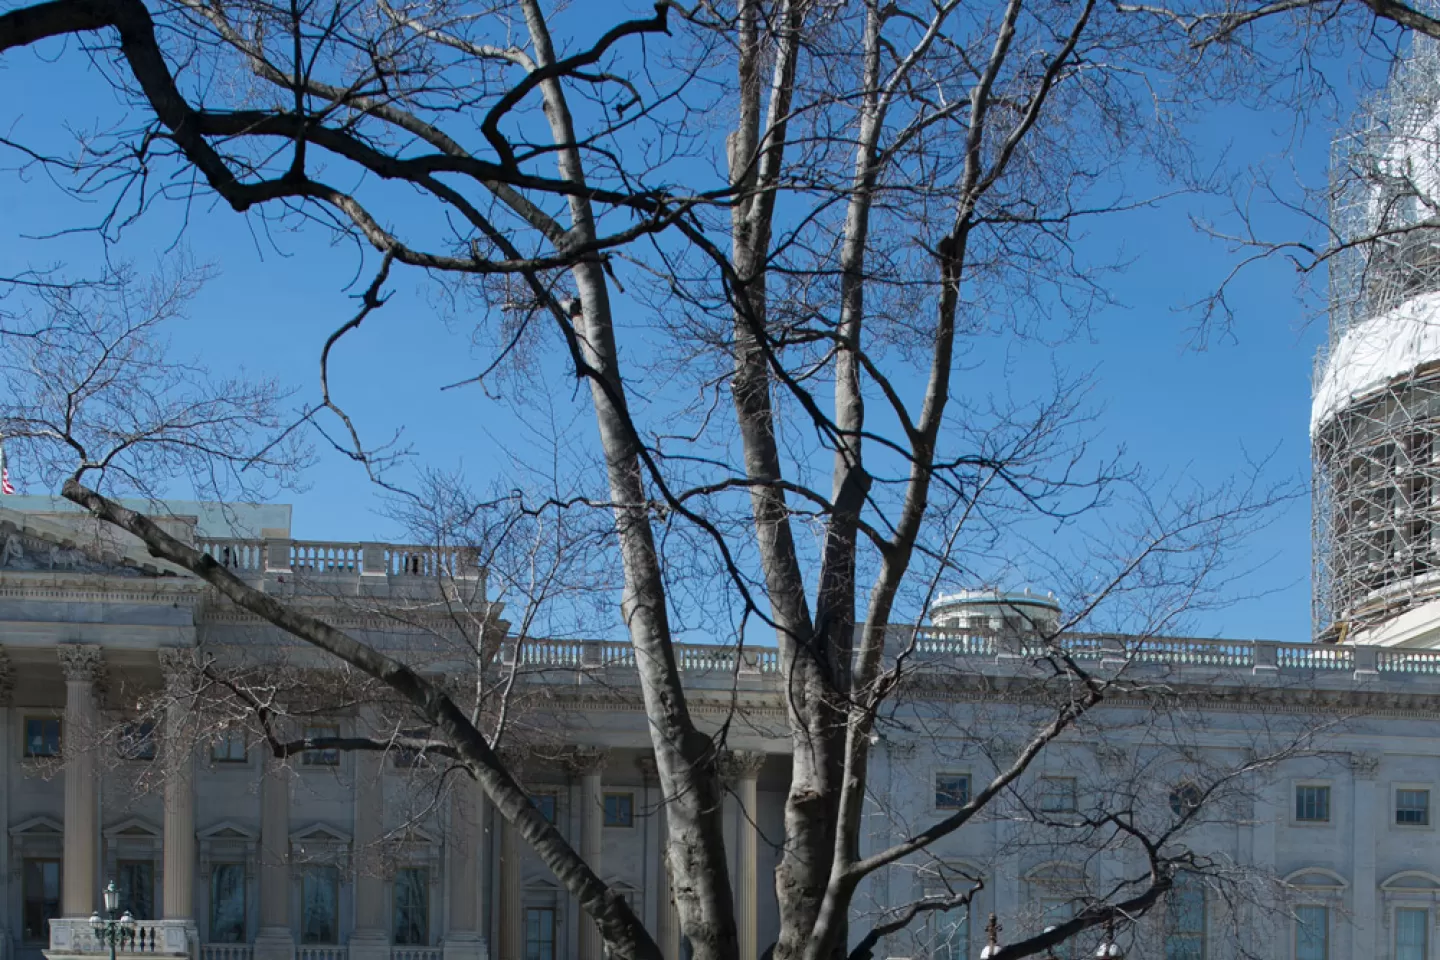 The Rep. Joseph Walsh tree on the U.S. Capitol Grounds during winter.